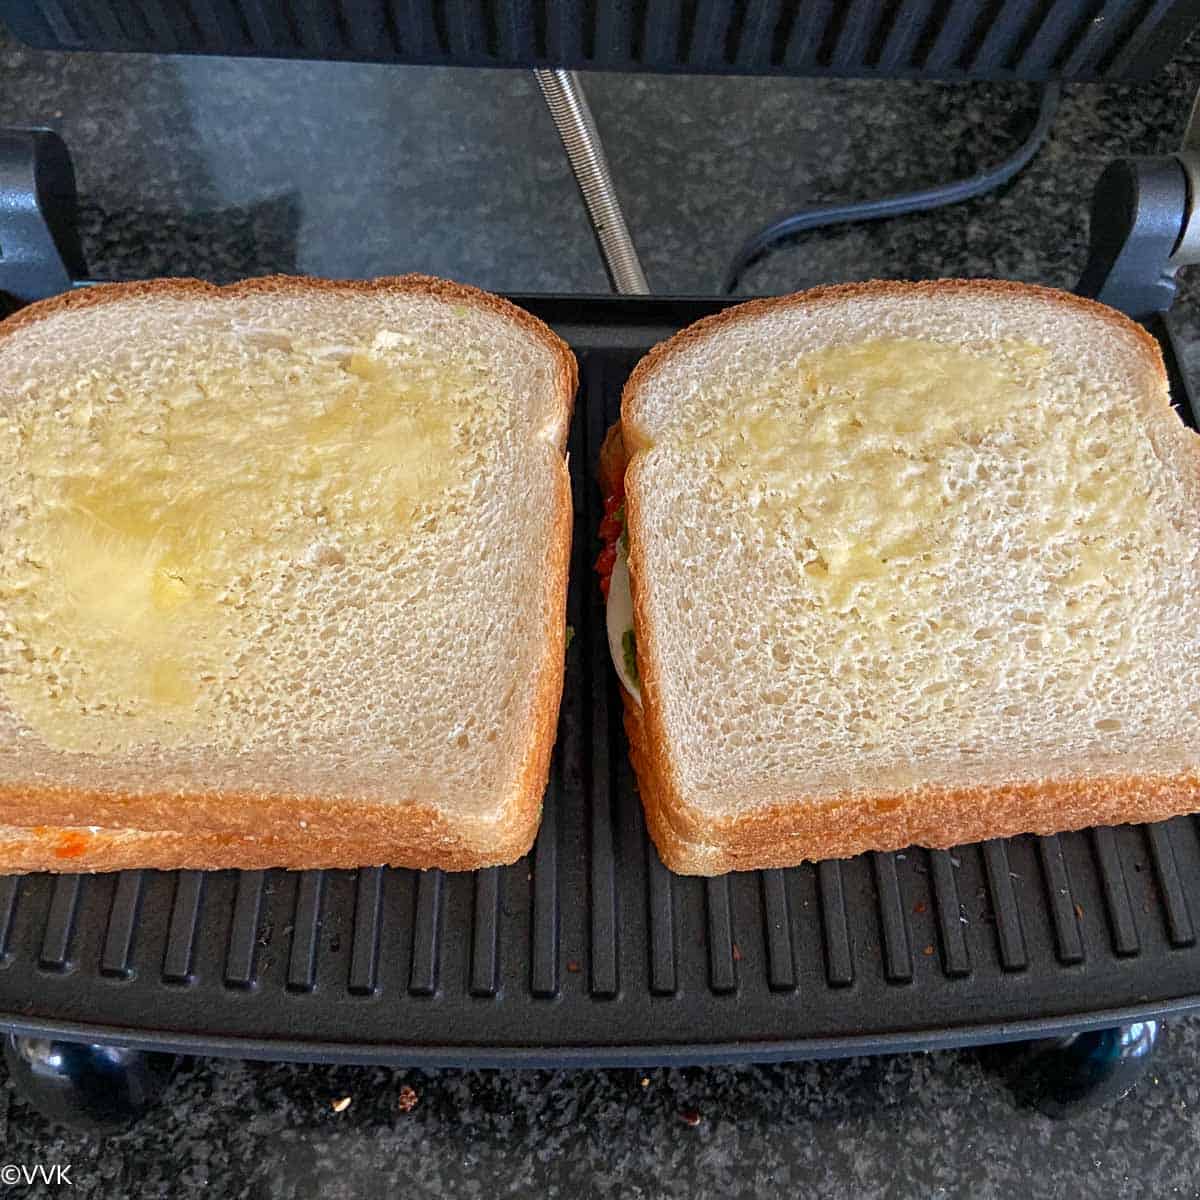 closing the sandwich and spreading butter